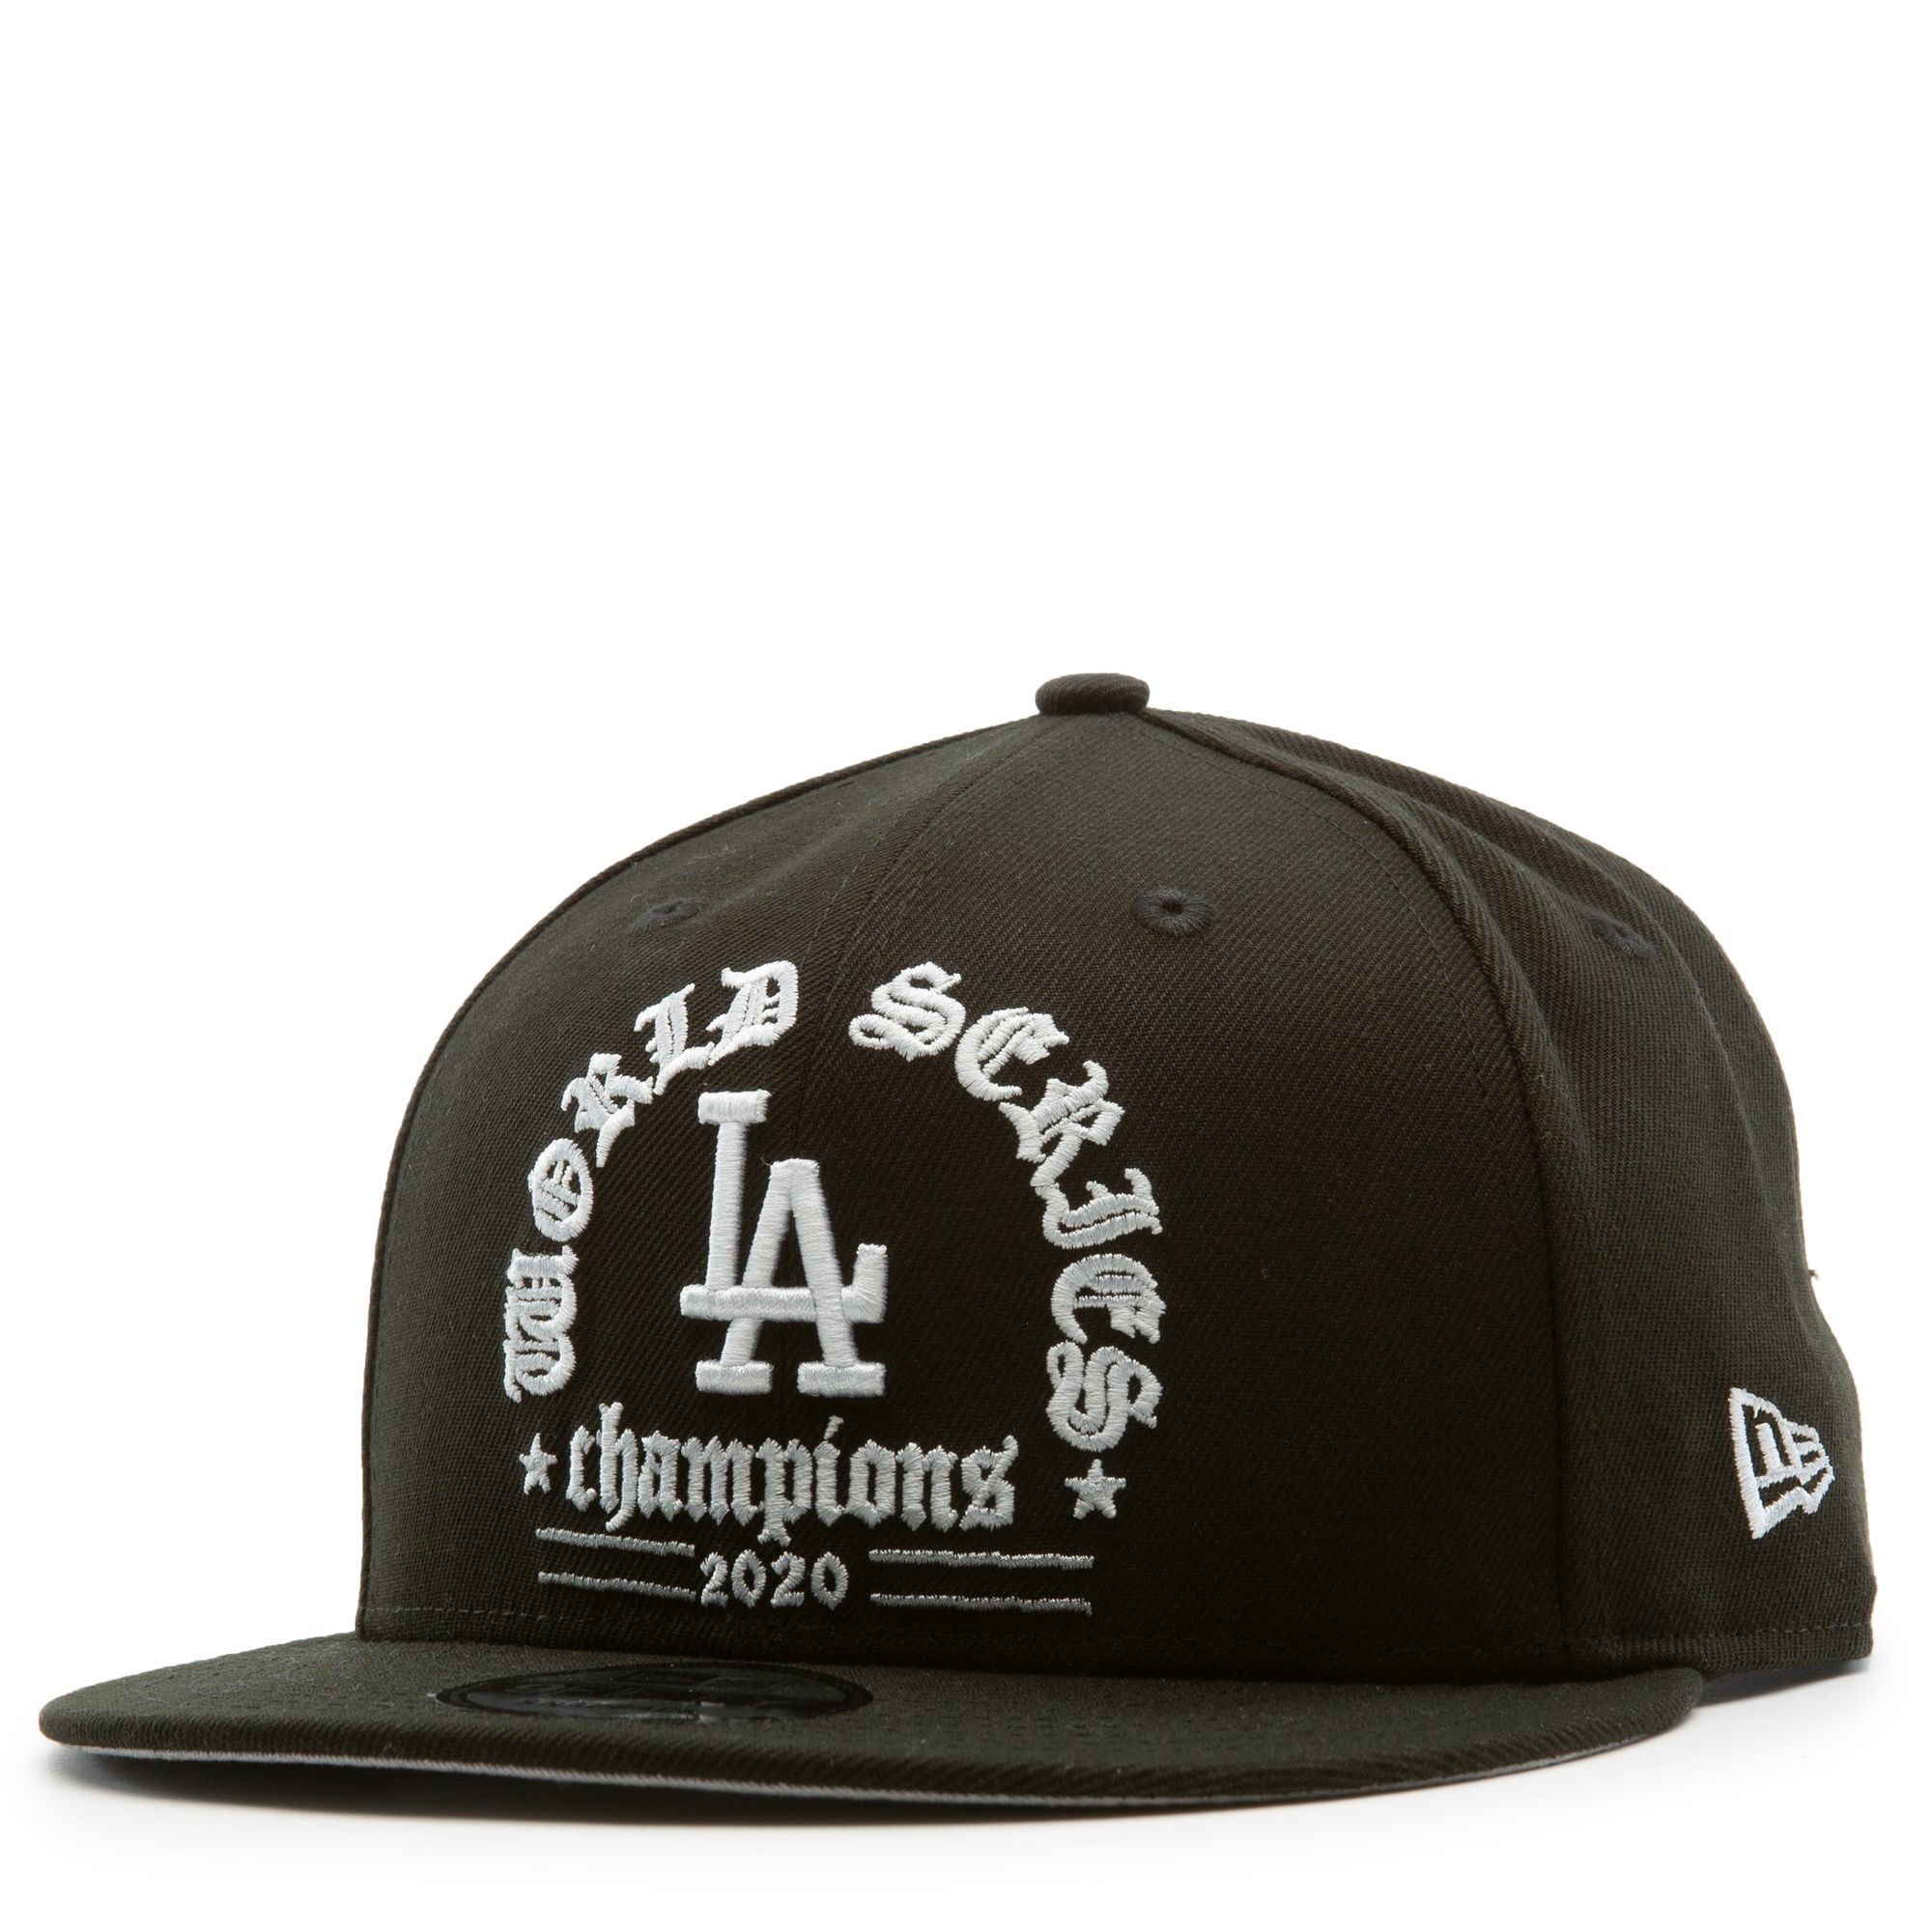 New Era Dodgers City Connect Jr 950 in Royal/Black One Size | WSS